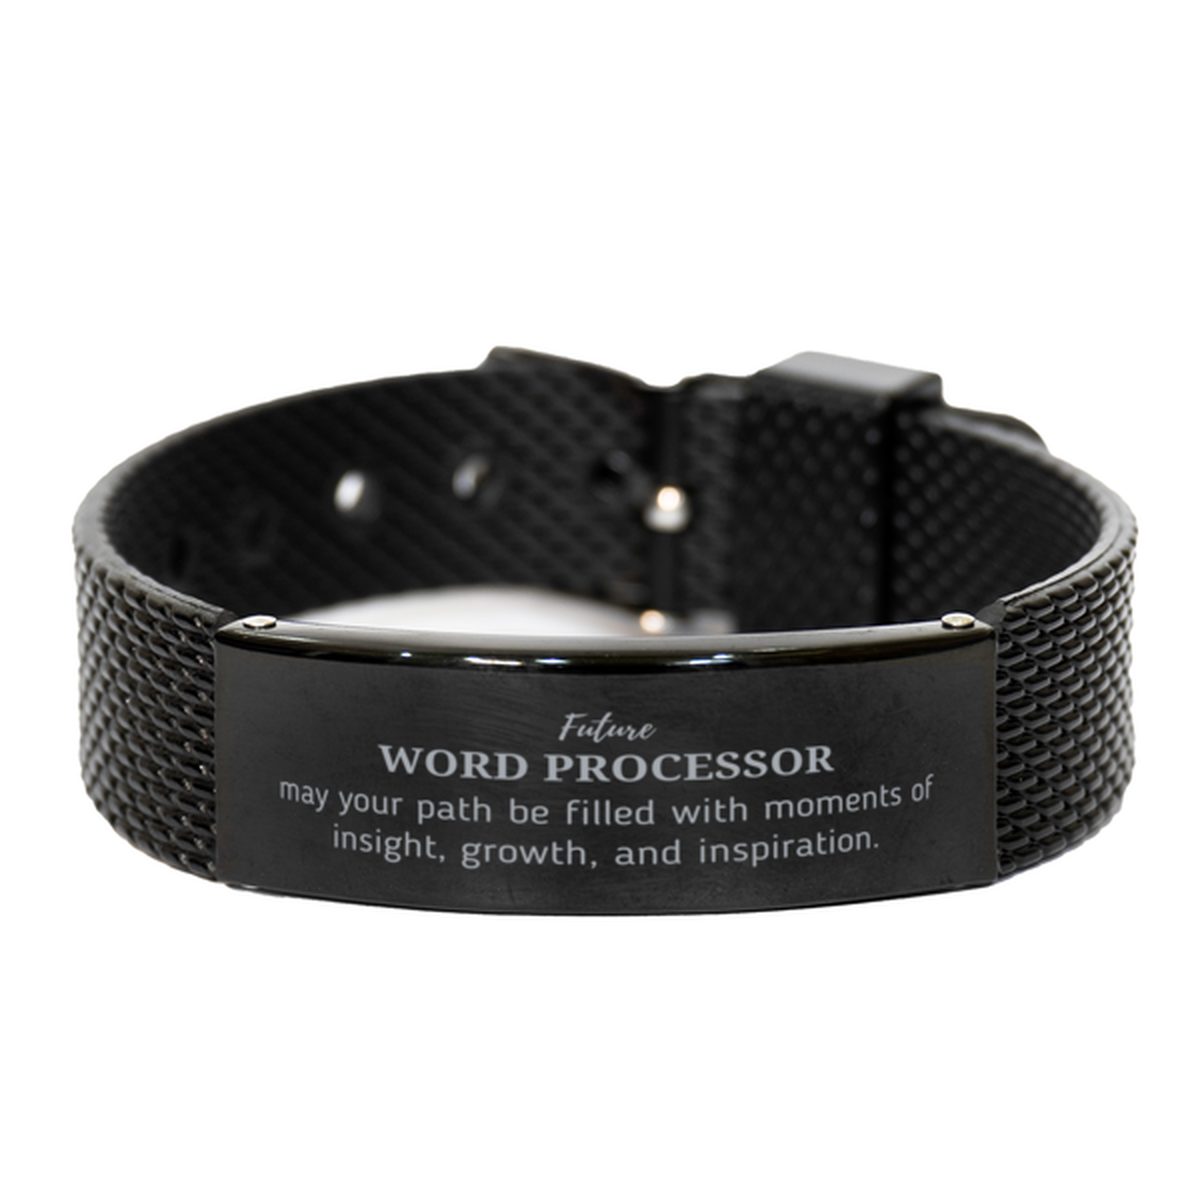 Future Word Processor Gifts, May your path be filled with moments of insight, Graduation Gifts for New Word Processor, Christmas Unique Black Shark Mesh Bracelet For Men, Women, Friends